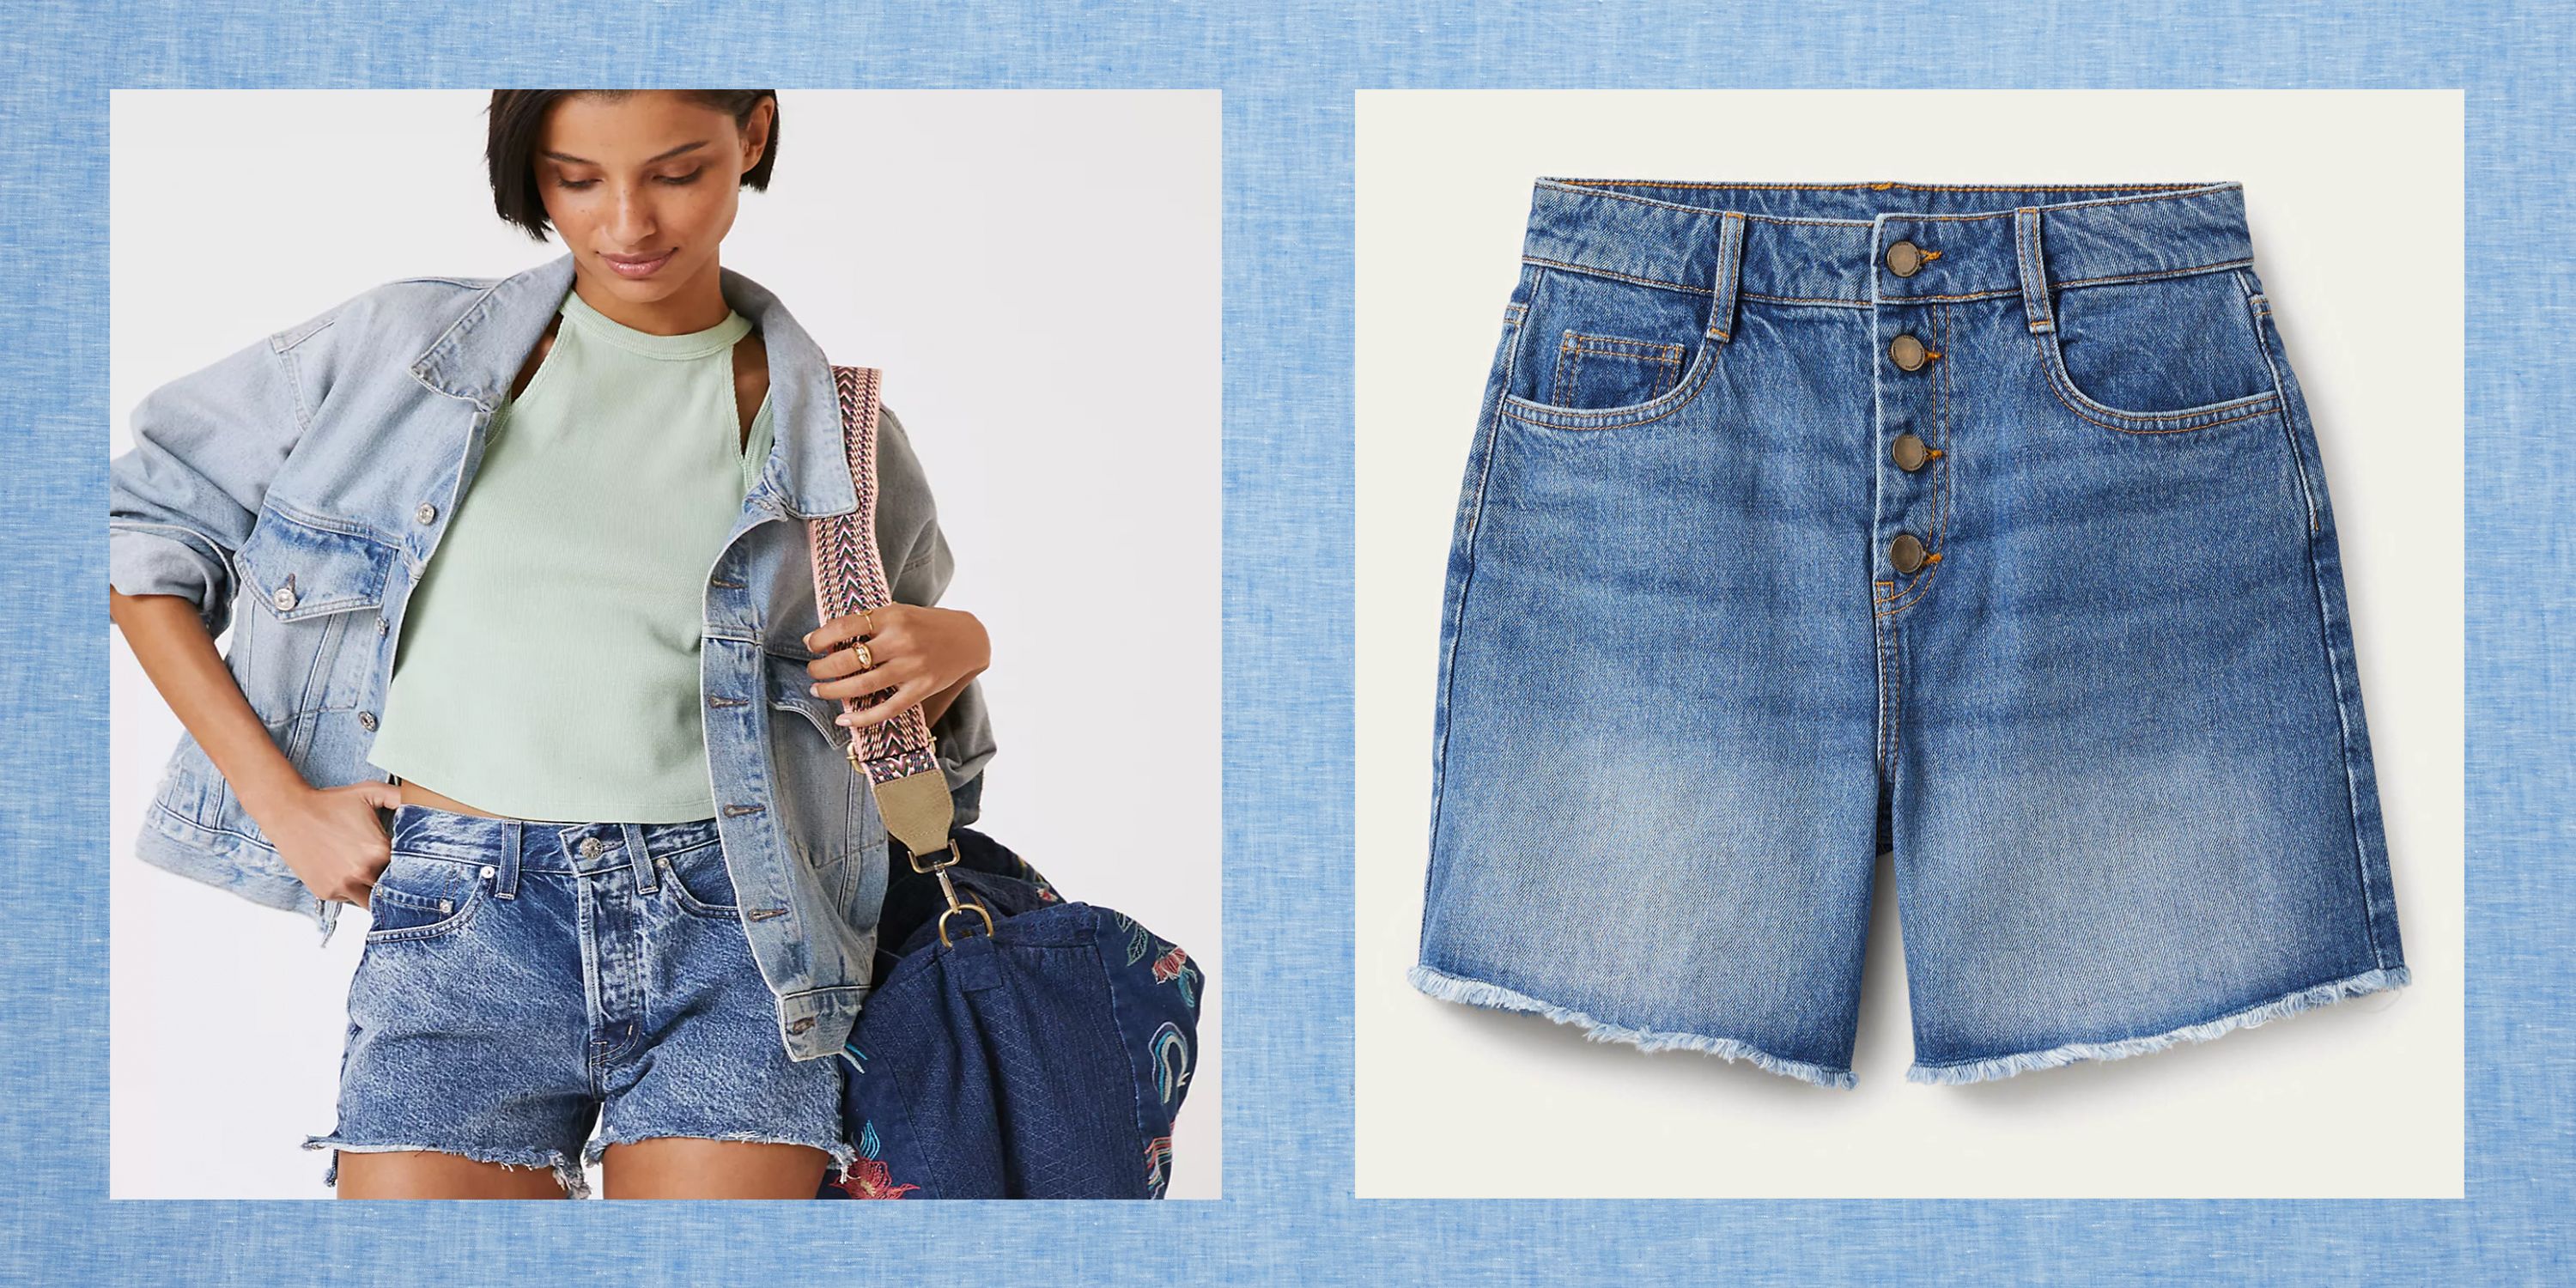 DSquared² Shorts Denim in Blue Womens Clothing Shorts Jean and denim shorts 